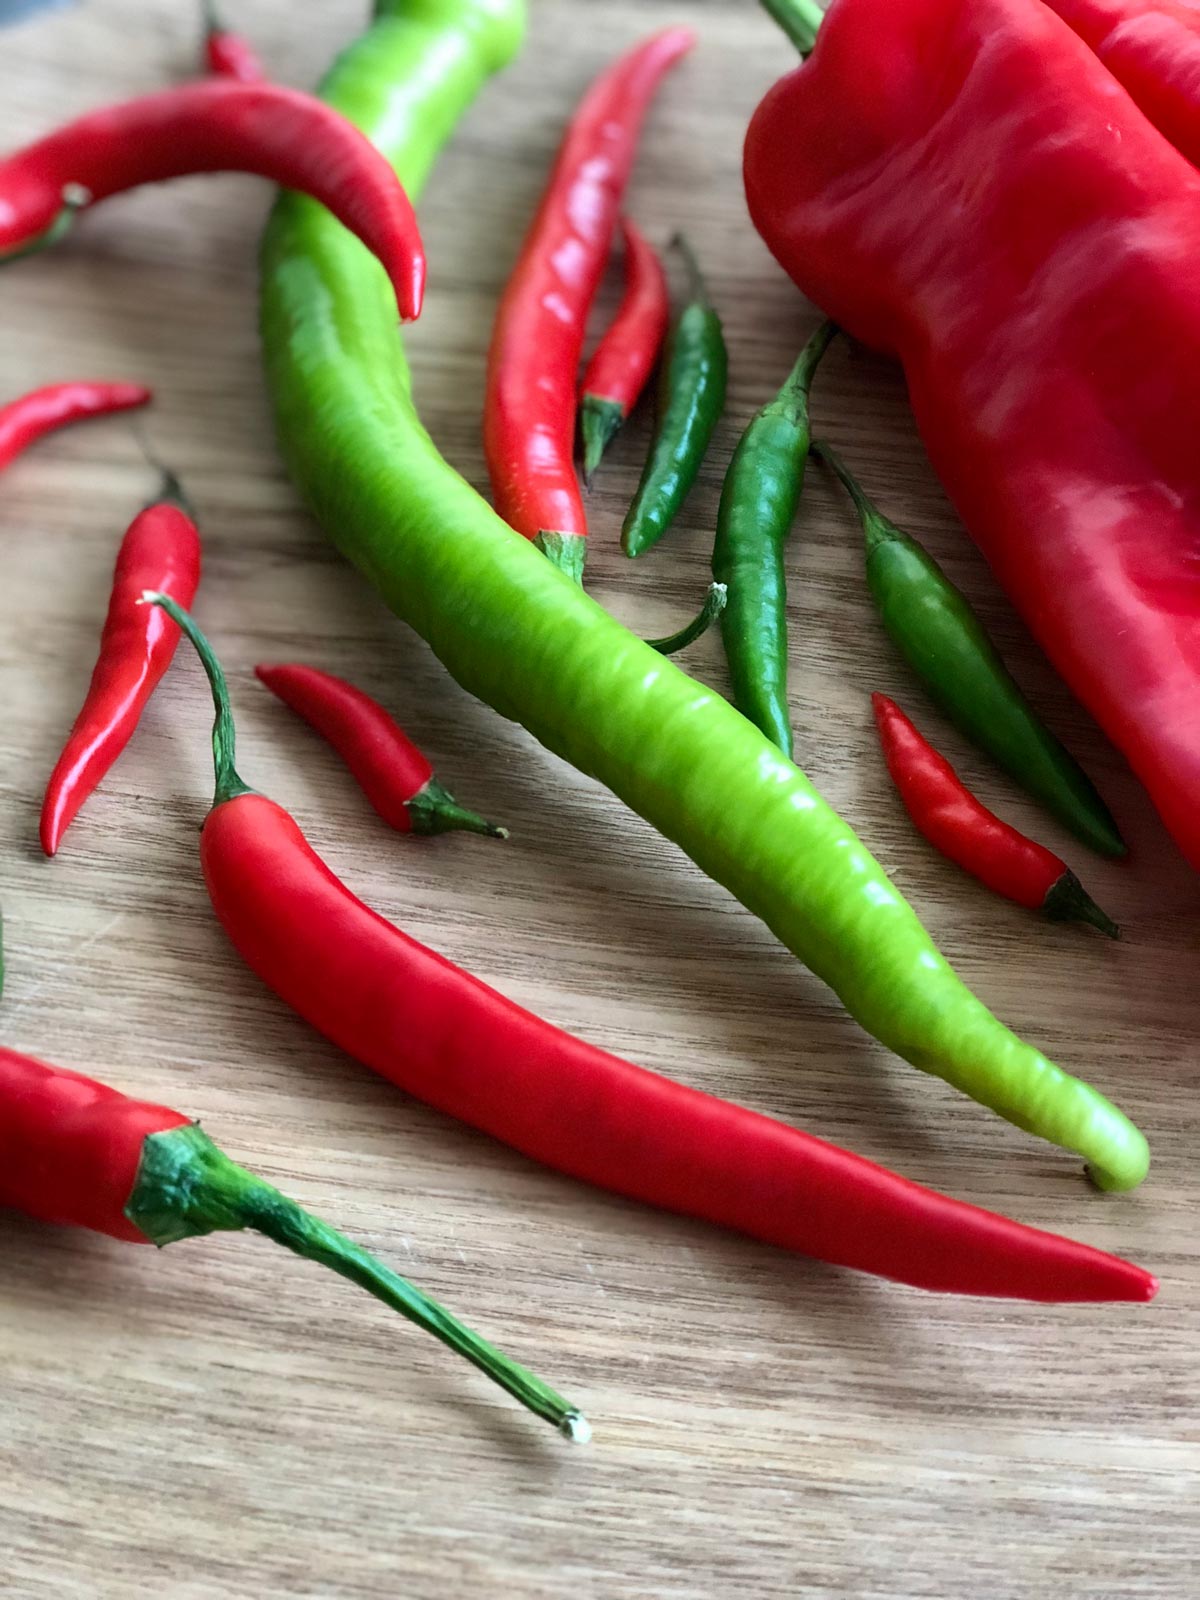 green and red chilli